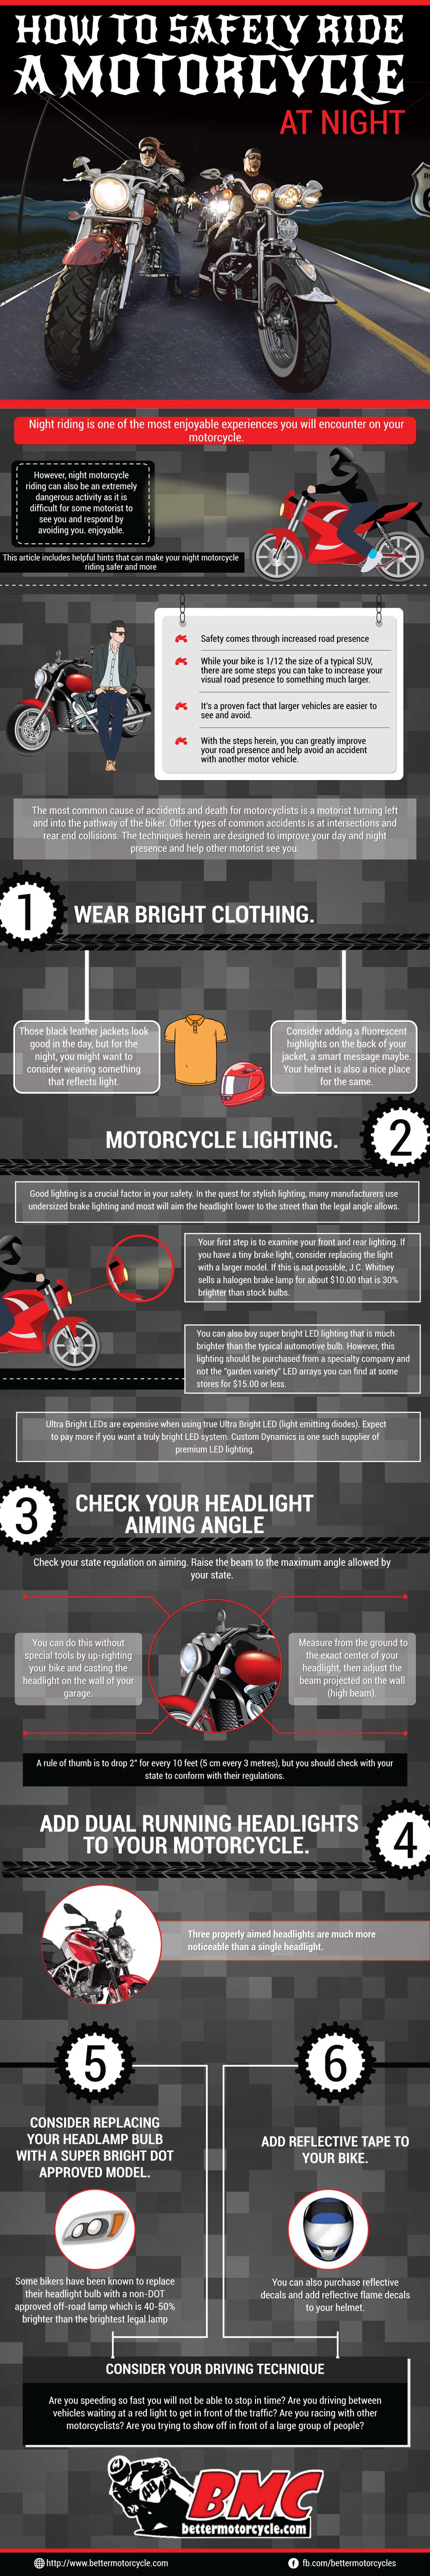 How to Safely Ride a Motorcycle at Night